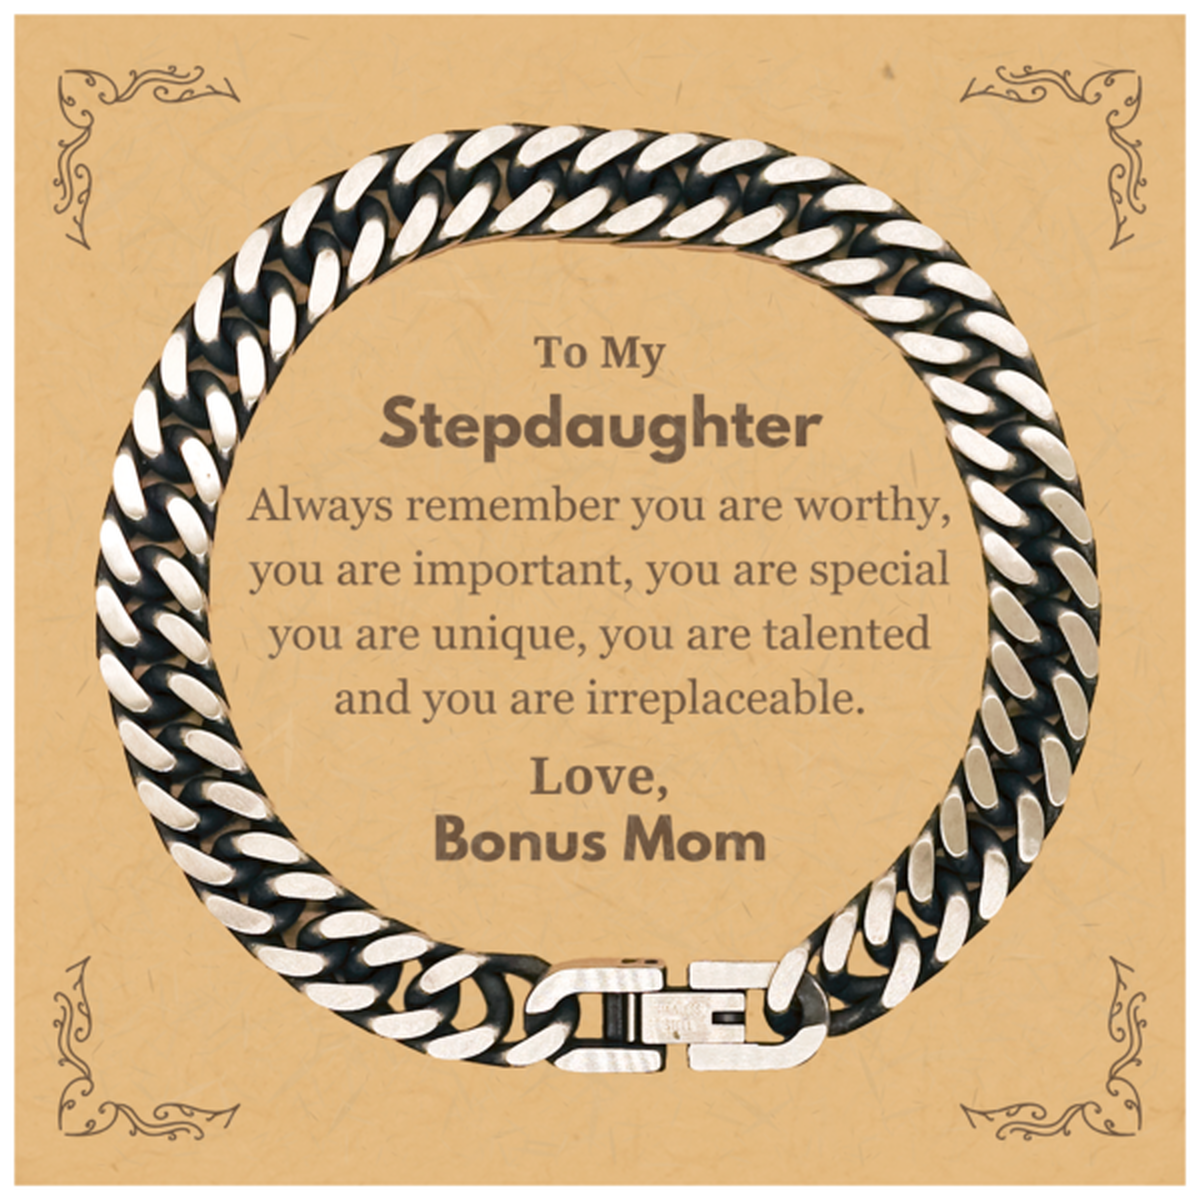 Stepdaughter Birthday Gifts from Bonus Mom, Inspirational Cuban Link Chain Bracelet for Stepdaughter Christmas Graduation Gifts for Stepdaughter Always remember you are worthy, you are important. Love, Bonus Mom